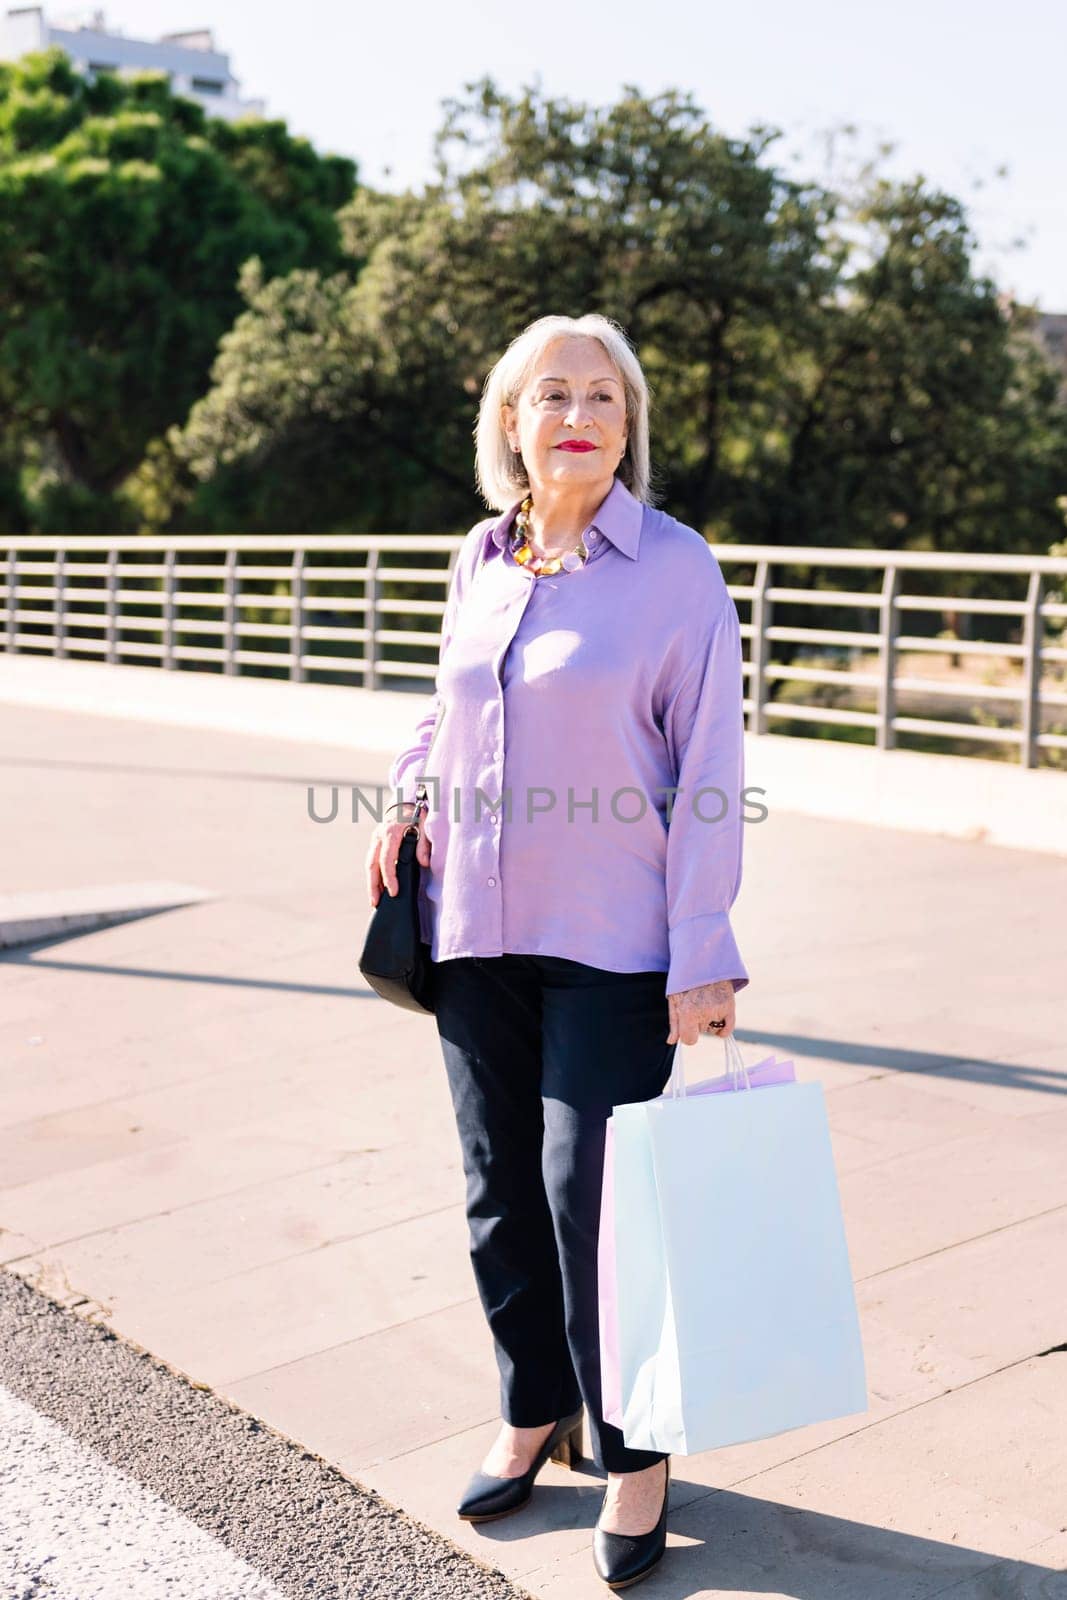 senior woman waiting standing with shopping bags in hand, concept of elderly people leisure and active lifestyle